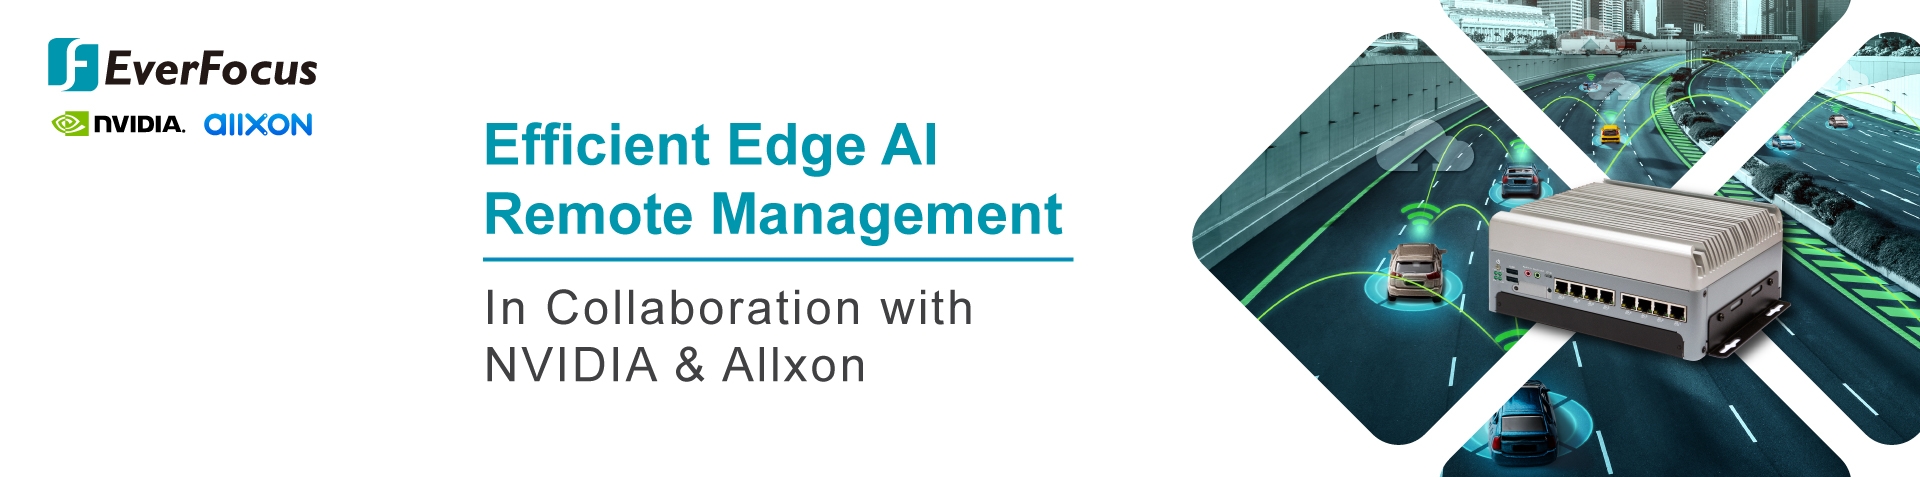 EverFocus Collaborates with Allxon to Realize Remote Device Management on Its NVIDIA Jetson AGX Xavier/Orin Systems